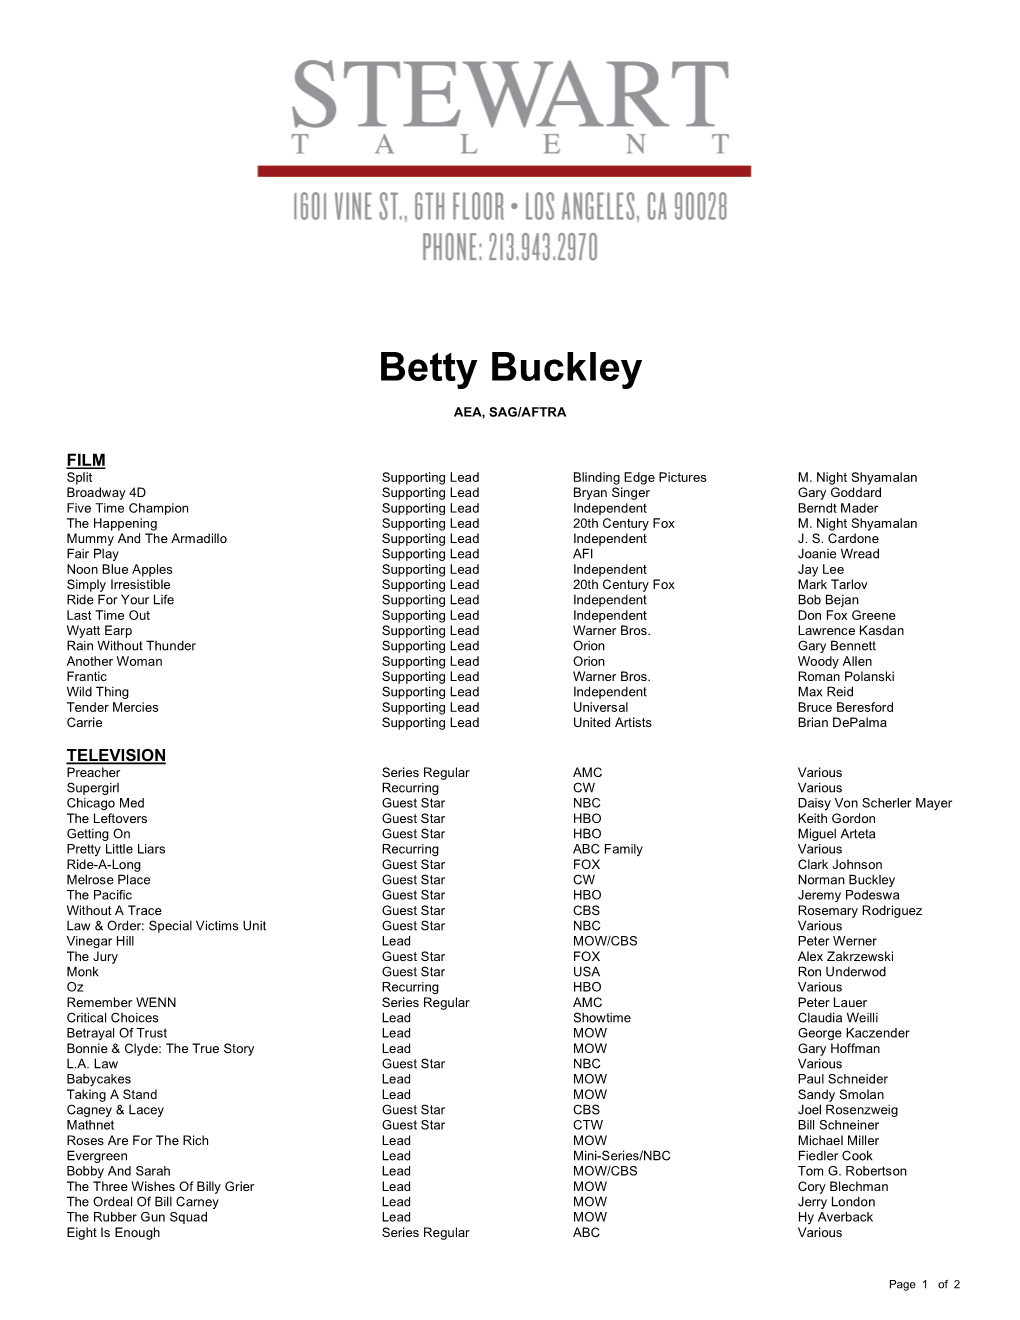 Betty Buckley Theatrical Resume